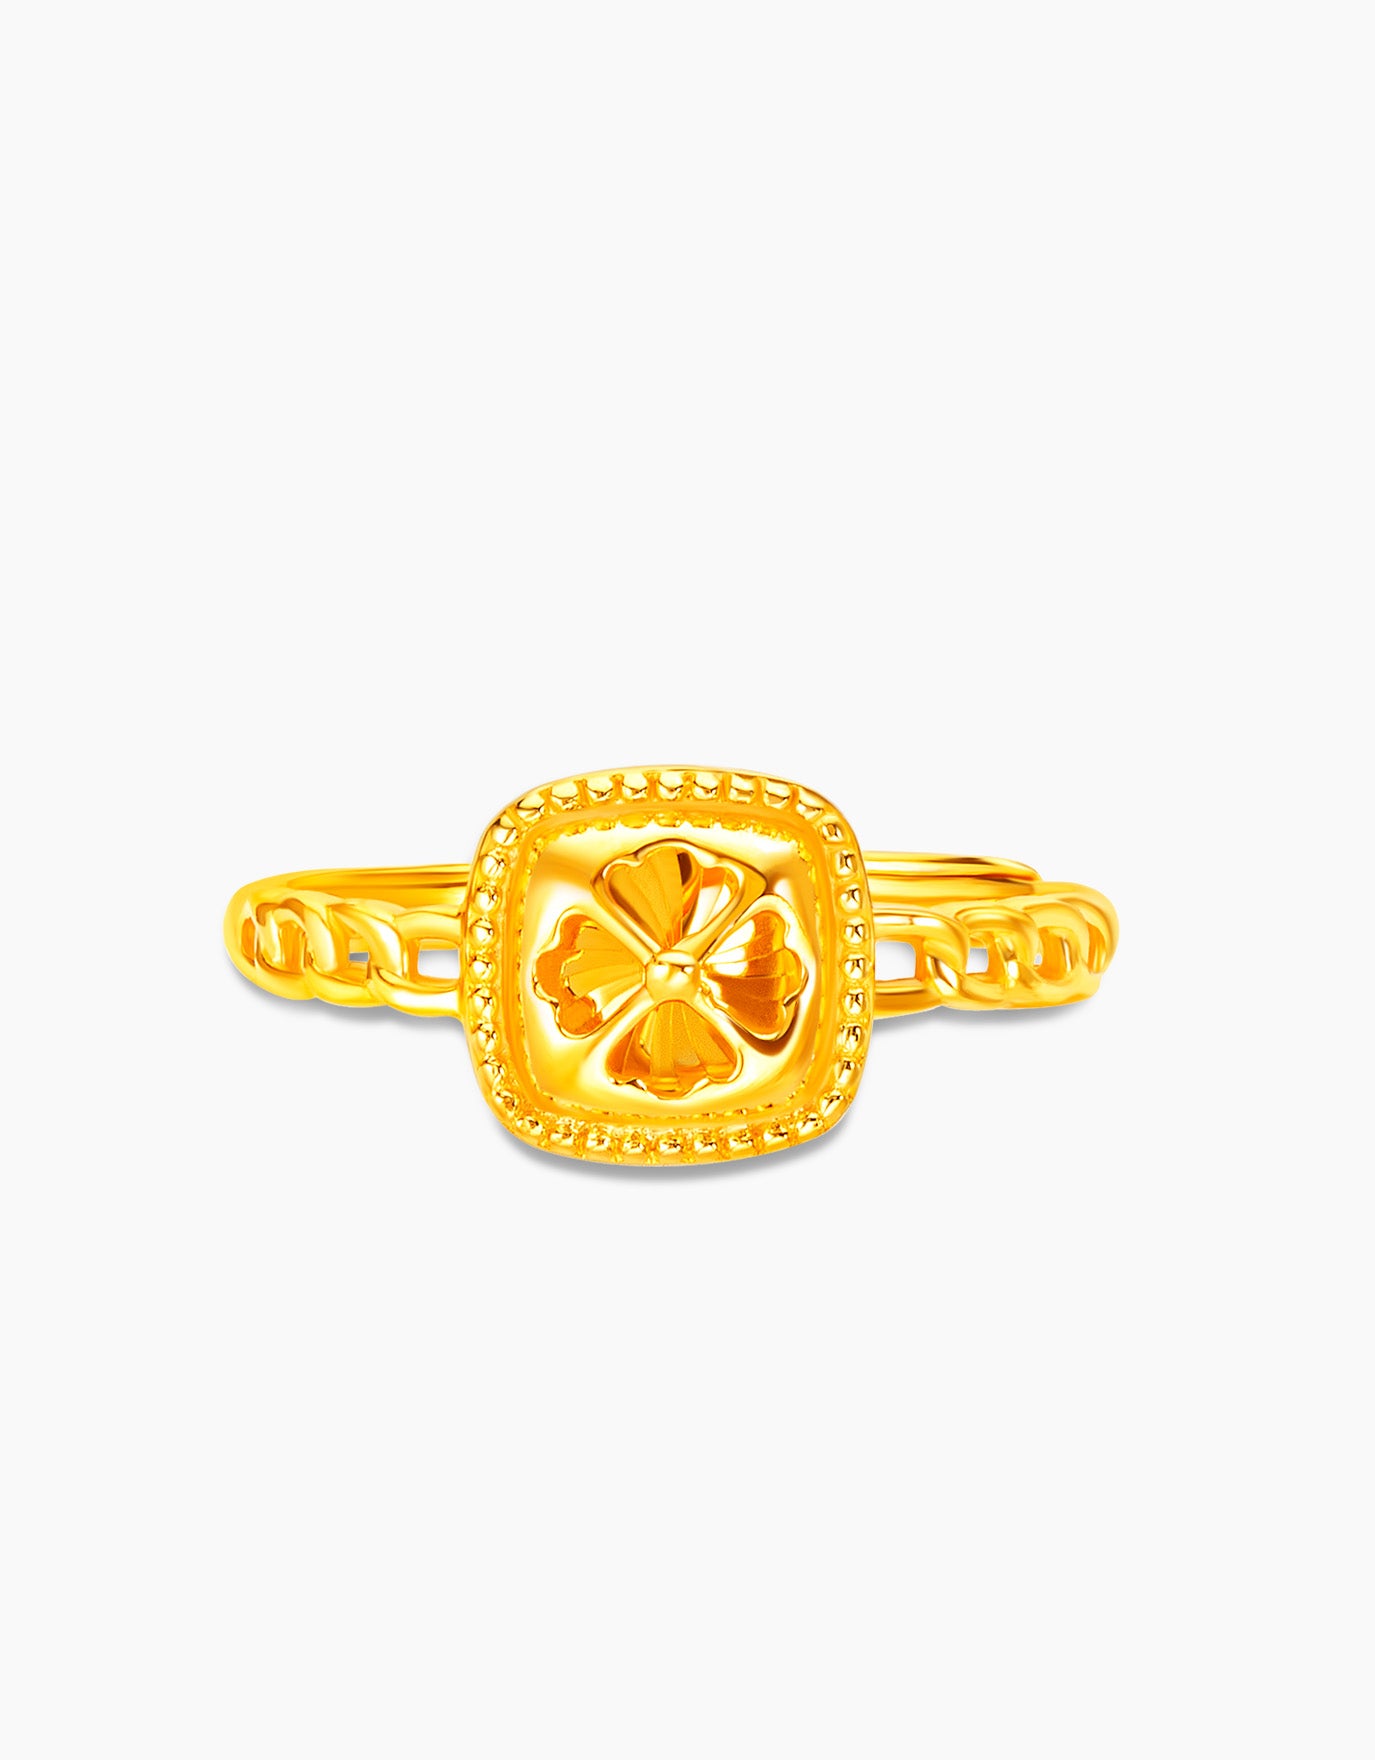 LVC 9IN Square Floret 999 Gold Ring